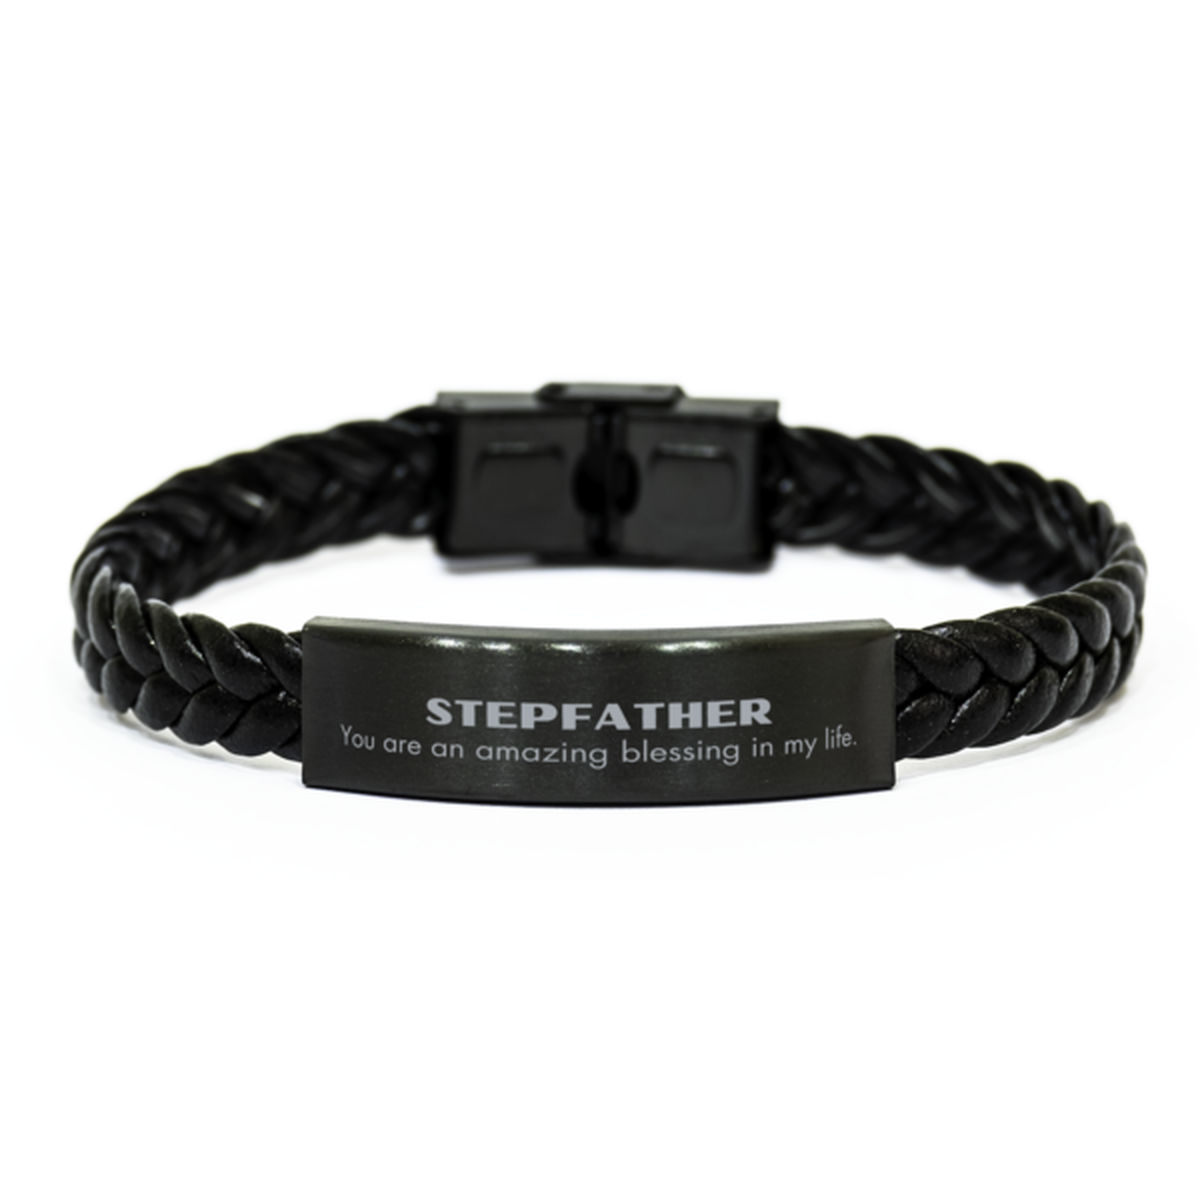 Stepfather Braided Leather Bracelet, You are an amazing blessing in my life, Thank You Gifts For Stepfather, Inspirational Birthday Christmas Unique Gifts For Stepfather